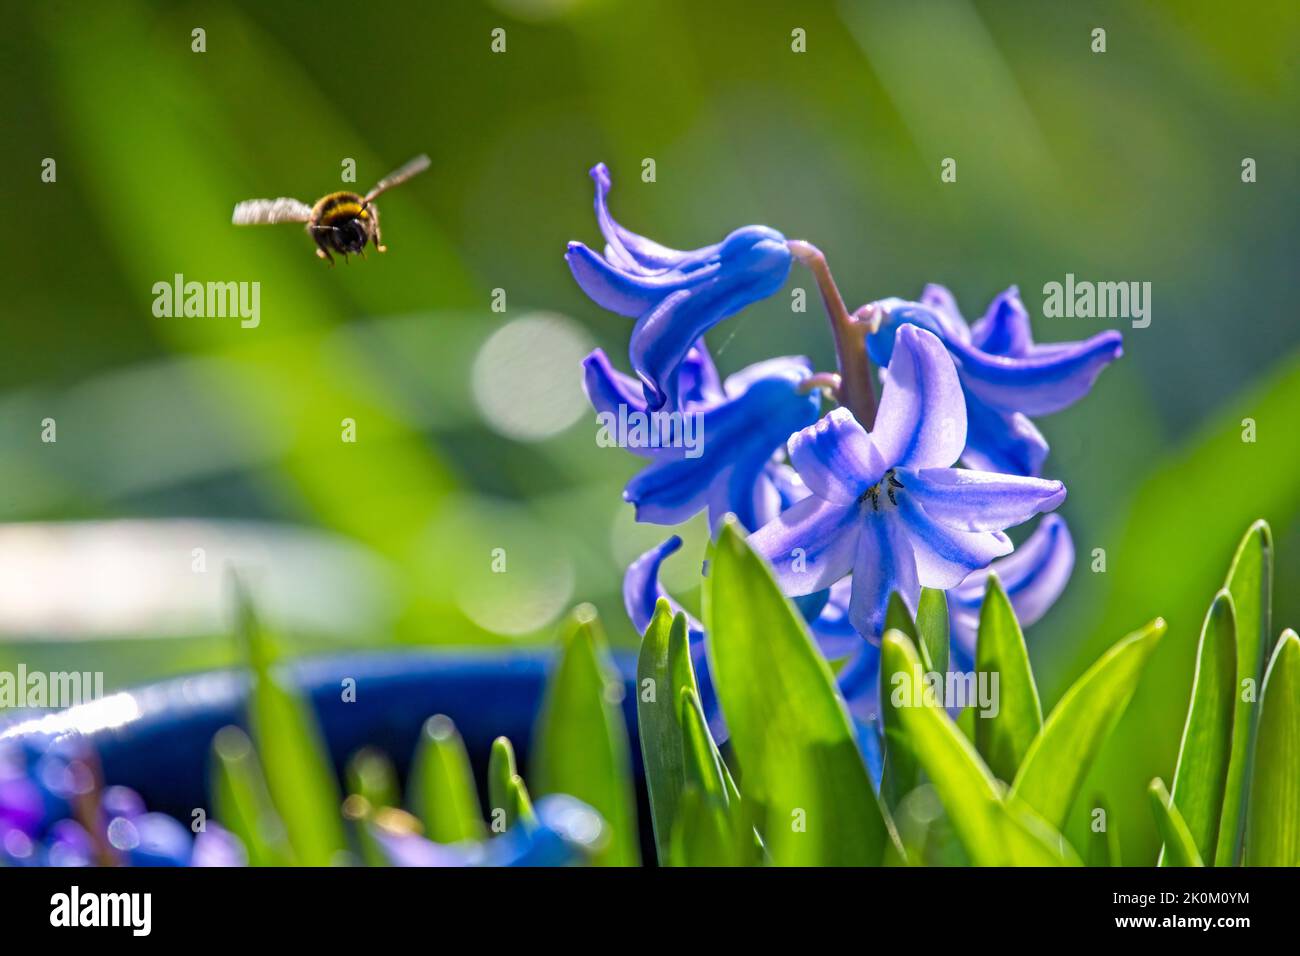 Bee approaching bluebell searching for nectar Stock Photo